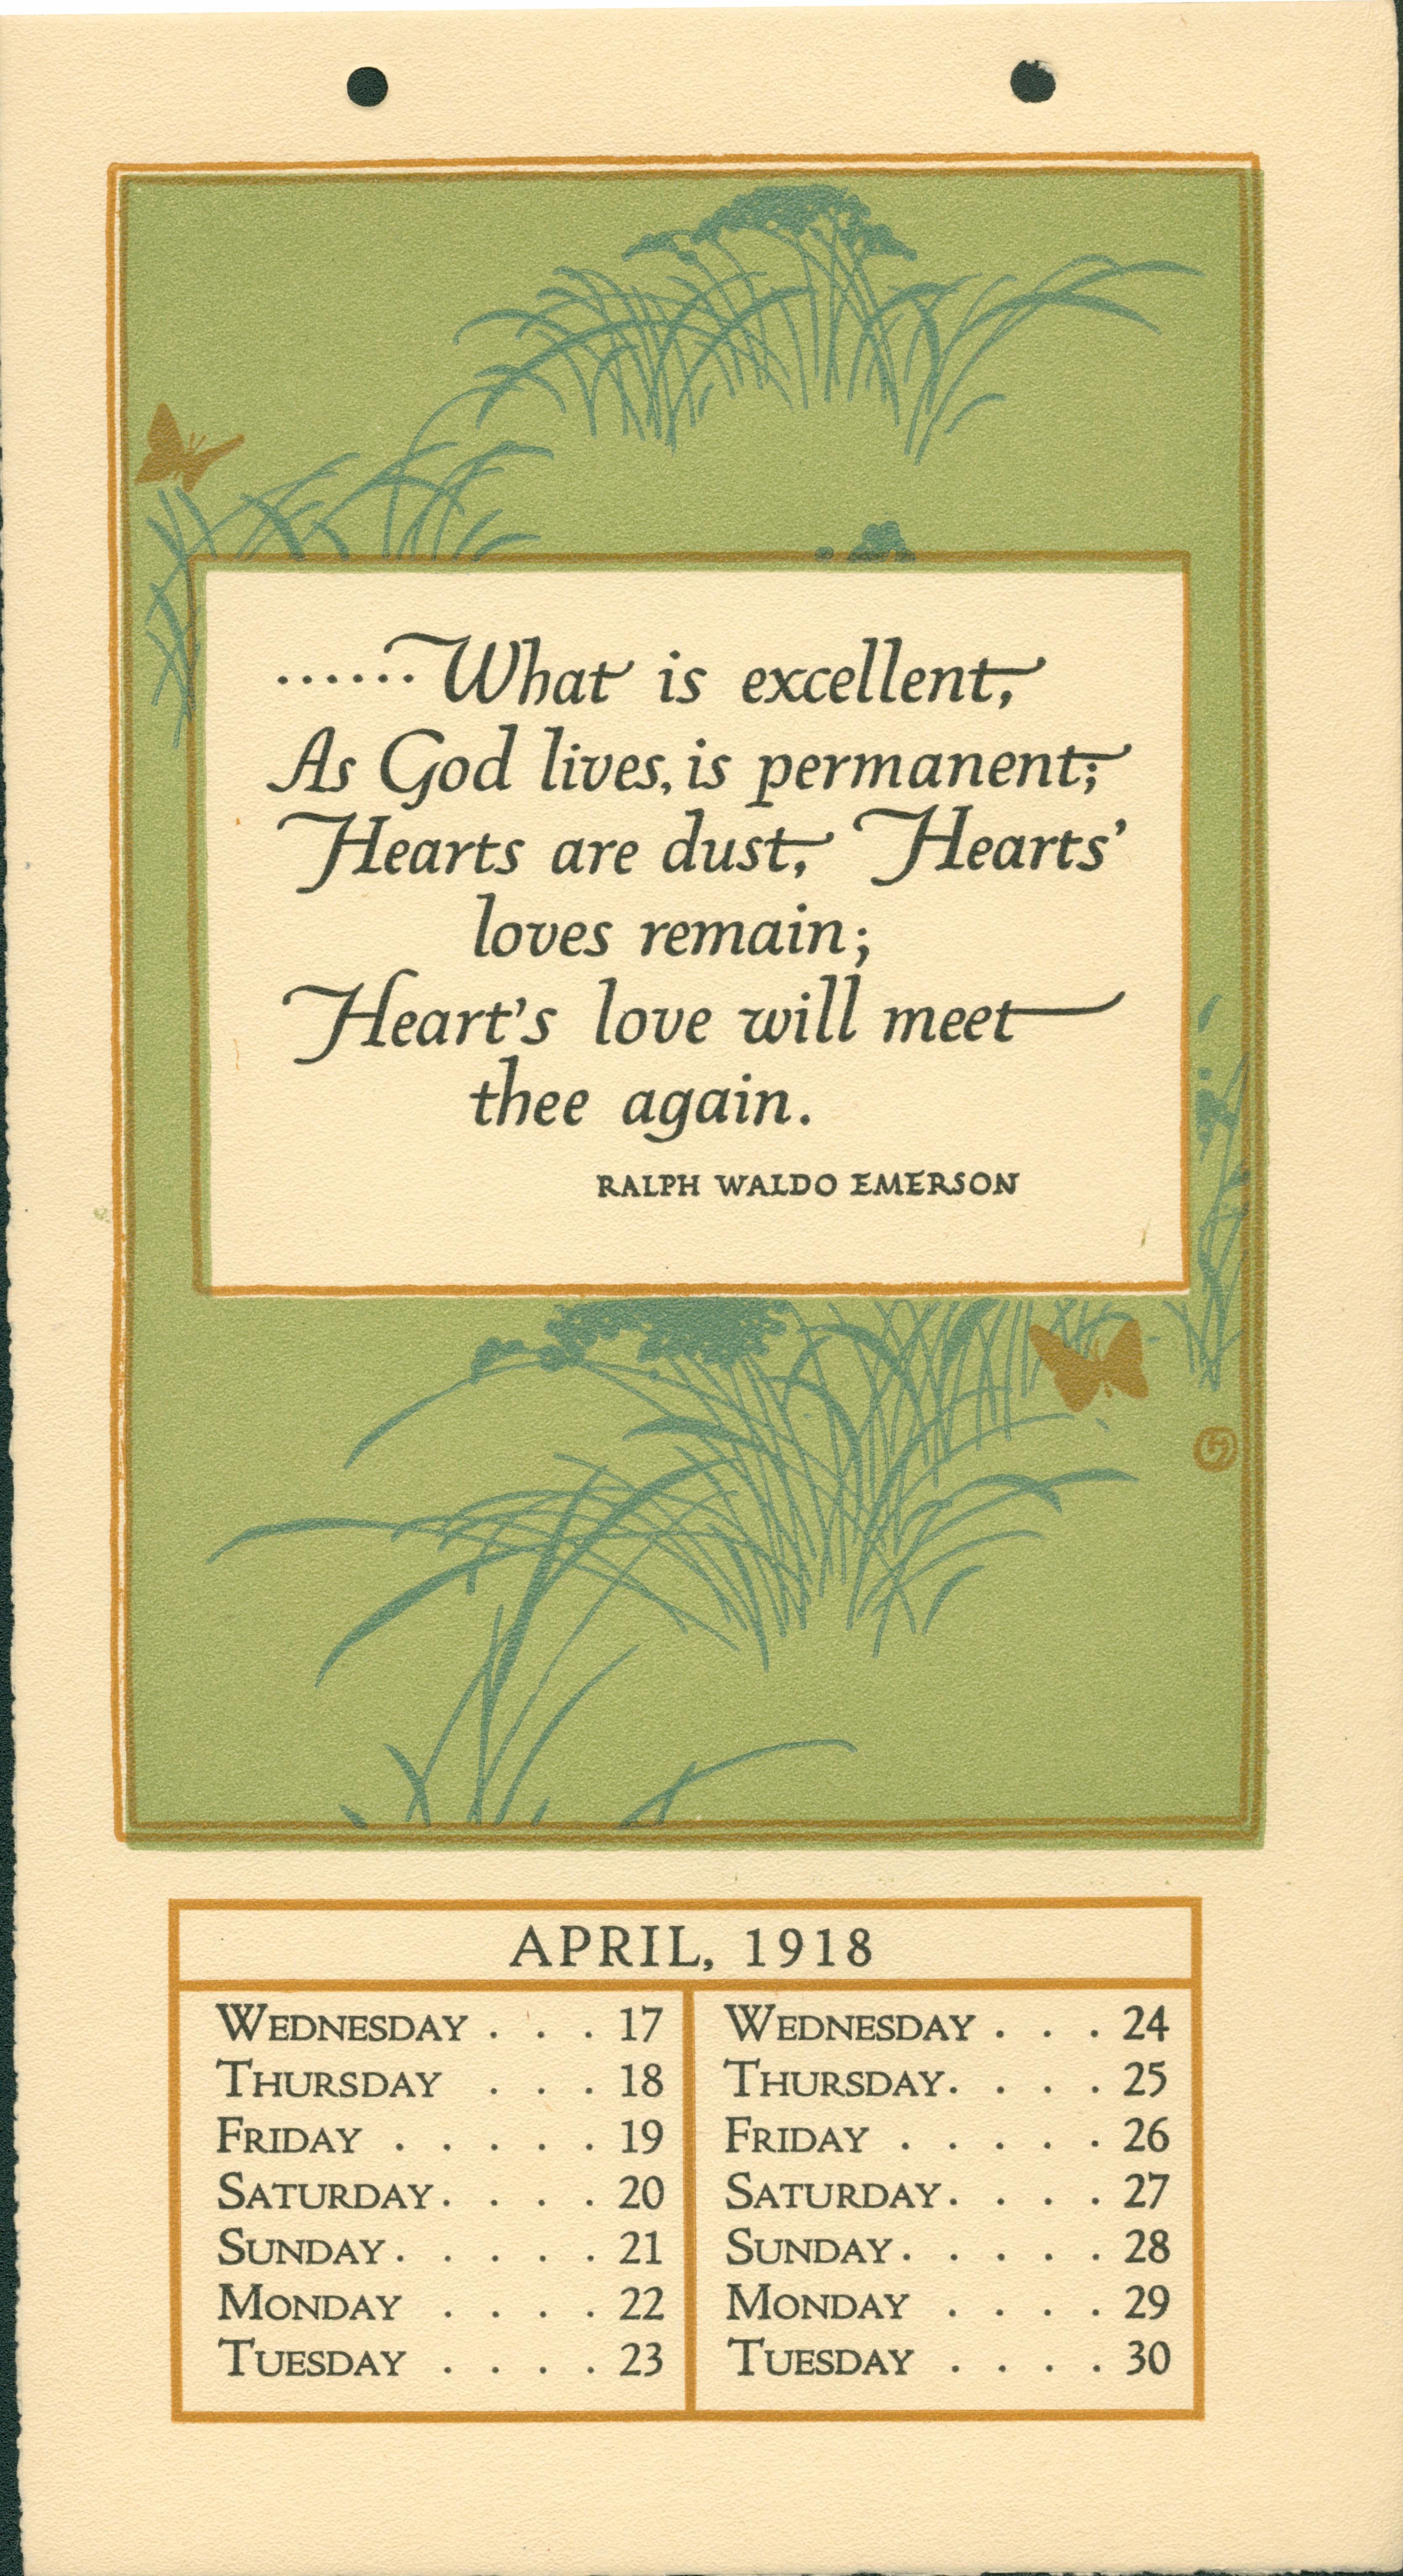 Each page consists of a short poem, surrounded by illustrations, with half of a month listed at the base. The selection in the image is for the second half of April, 1918 and contains a poem by Ralph Waldo Emerson.